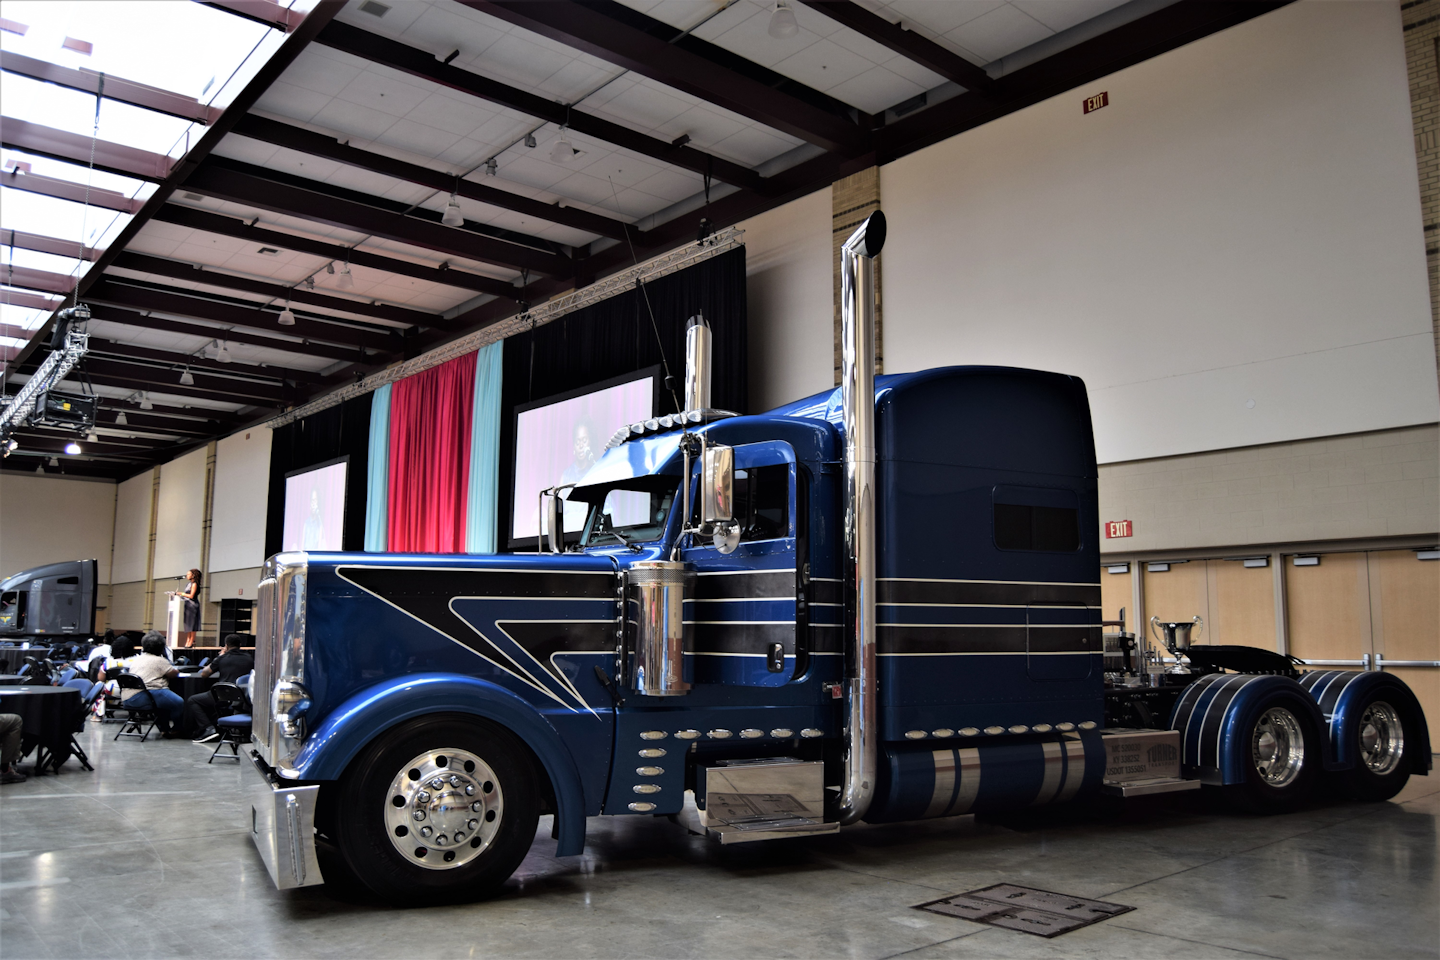 Also on hand on the show floor was the familiar striping pattern on this 2015 Peterbilt 389, Showtime, a past Pride & Polish-winning rig of Eric Turner's Turner Transport car-hauling small fleet out of Ellenwood, Georgia.